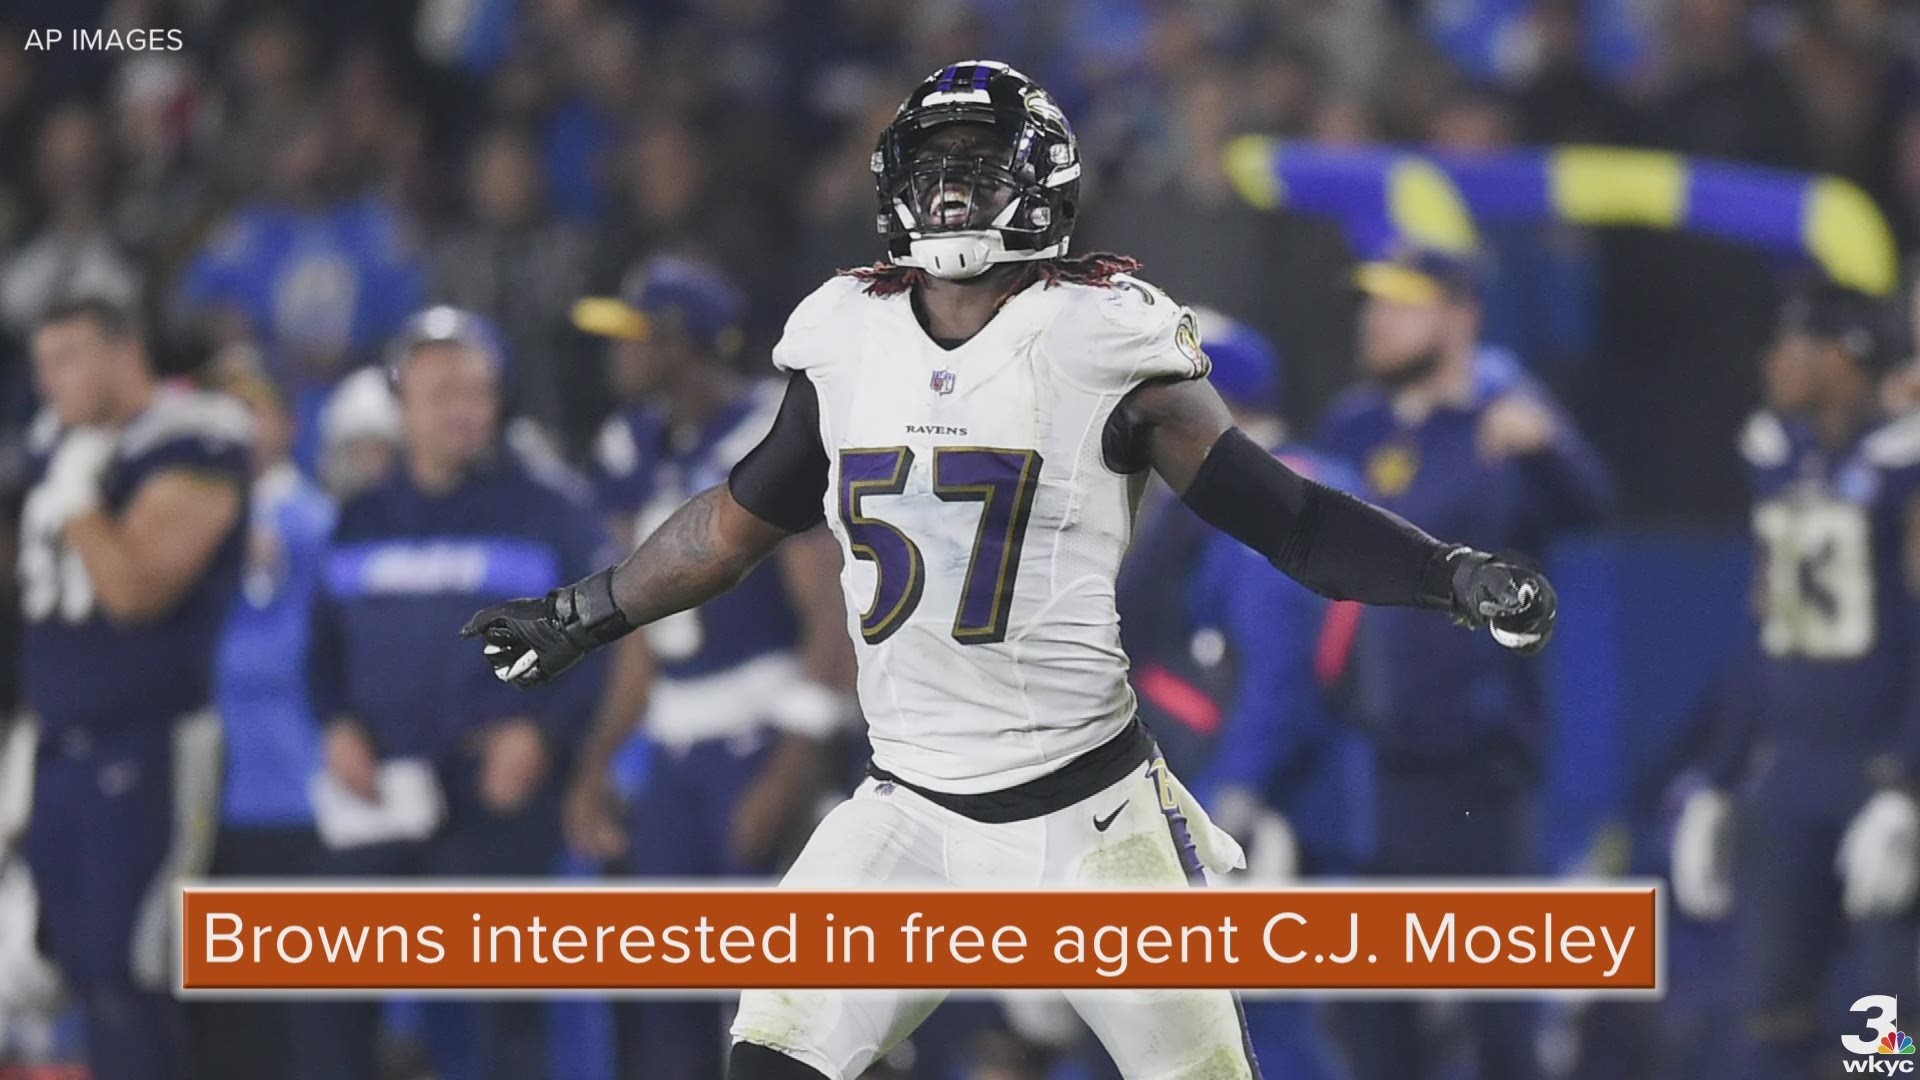 According to Mary Kay Cabot of Cleveland.com, the Cleveland Browns could make a run at former Baltimore Ravens linebacker and C.J. Mosley in free agency.